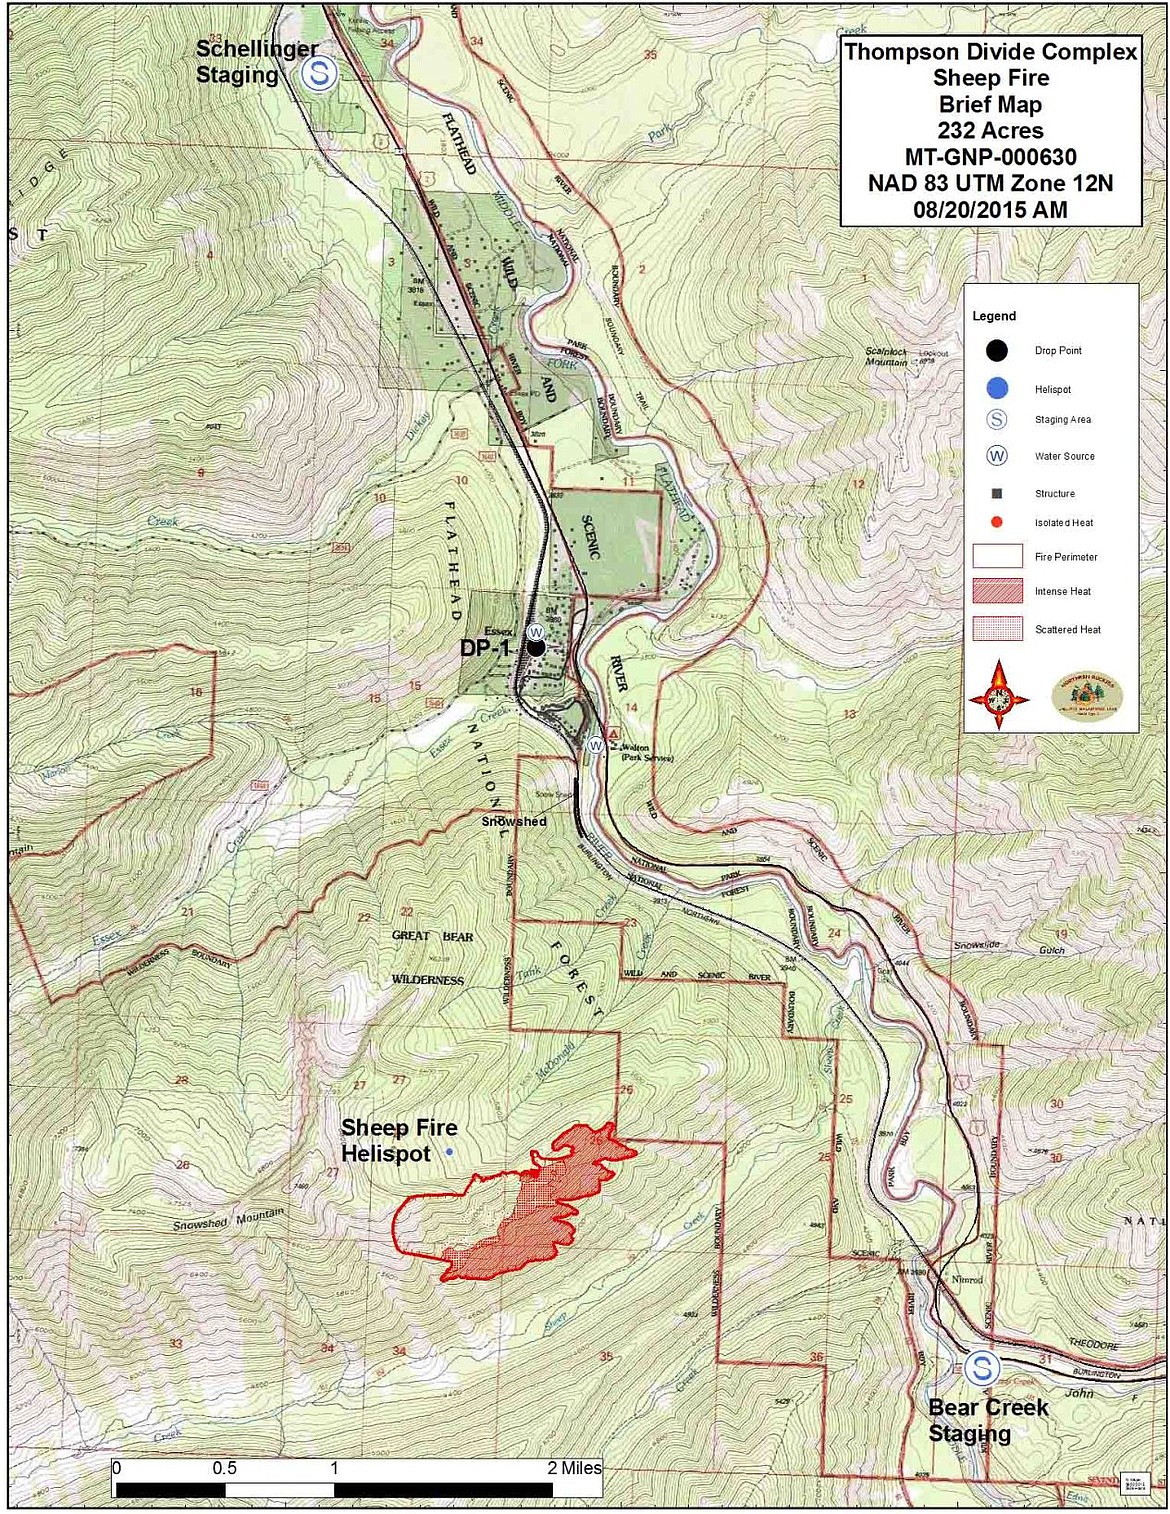 &lt;p&gt;&lt;strong&gt;This map&lt;/strong&gt; shows the area covered by the 232-acre Sheep Fire near Essex as of Thursday, Aug. 20.&lt;/p&gt;